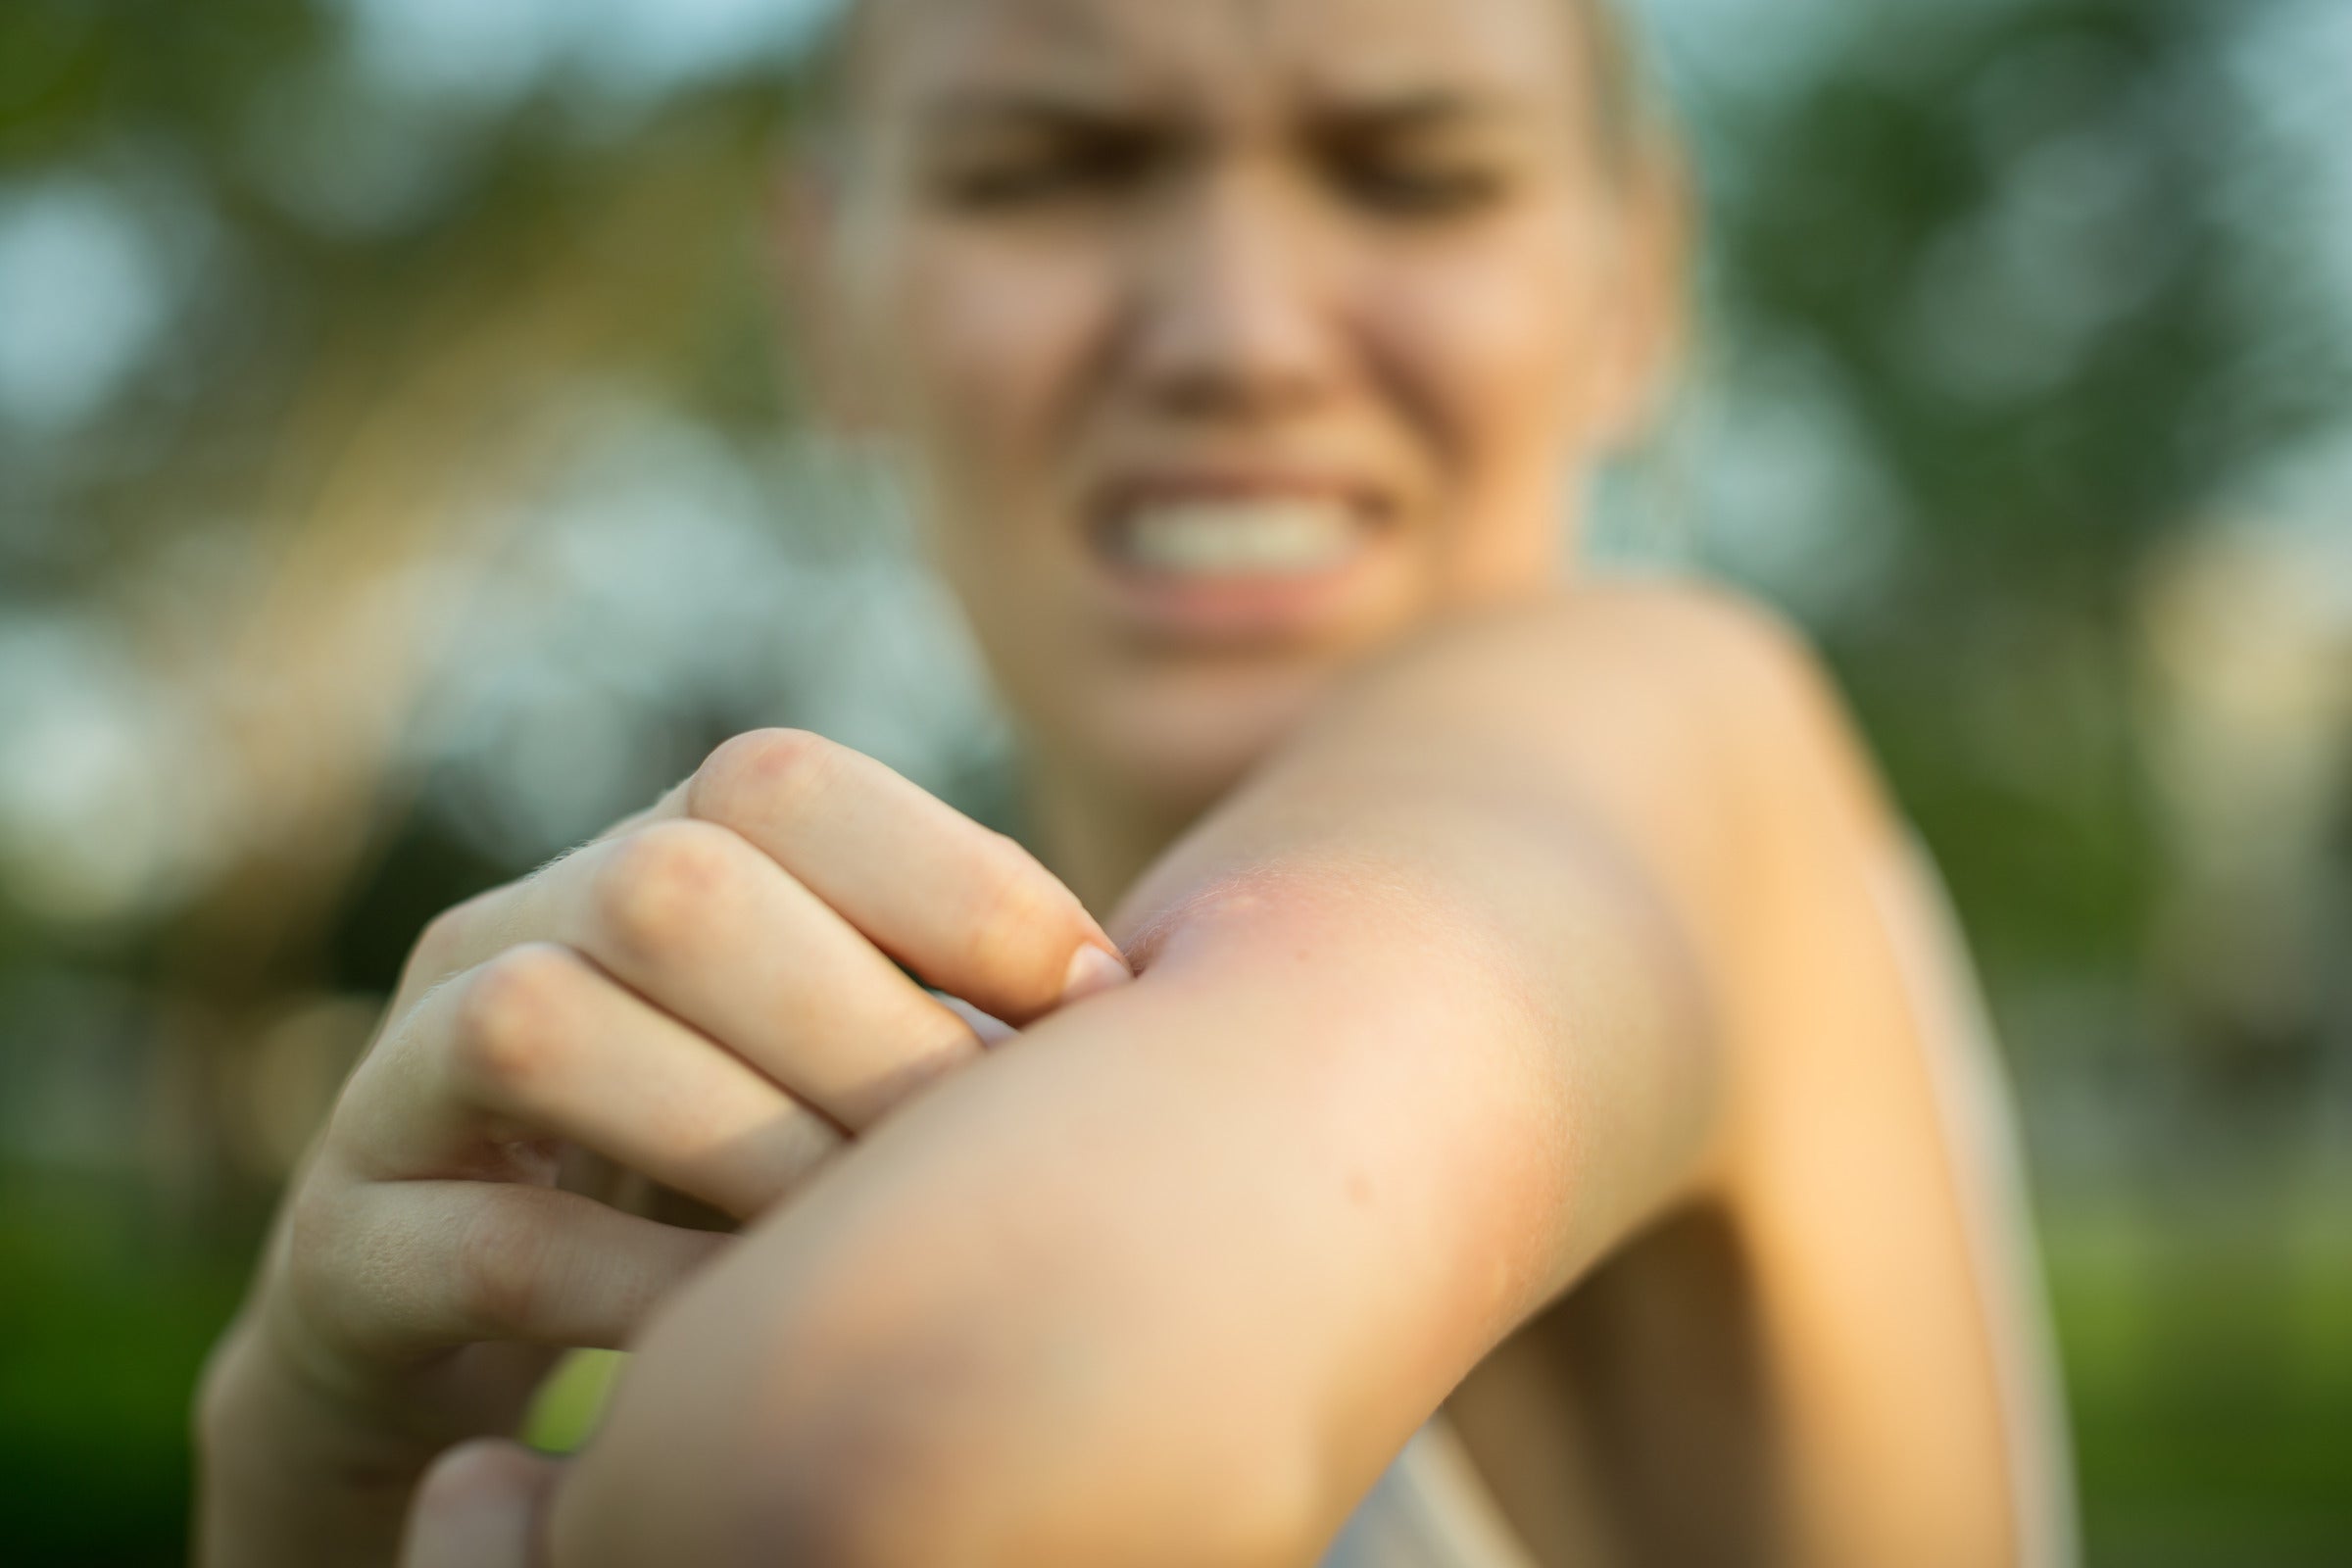 The 15 most effective home remedies for bug bites that itch and swell